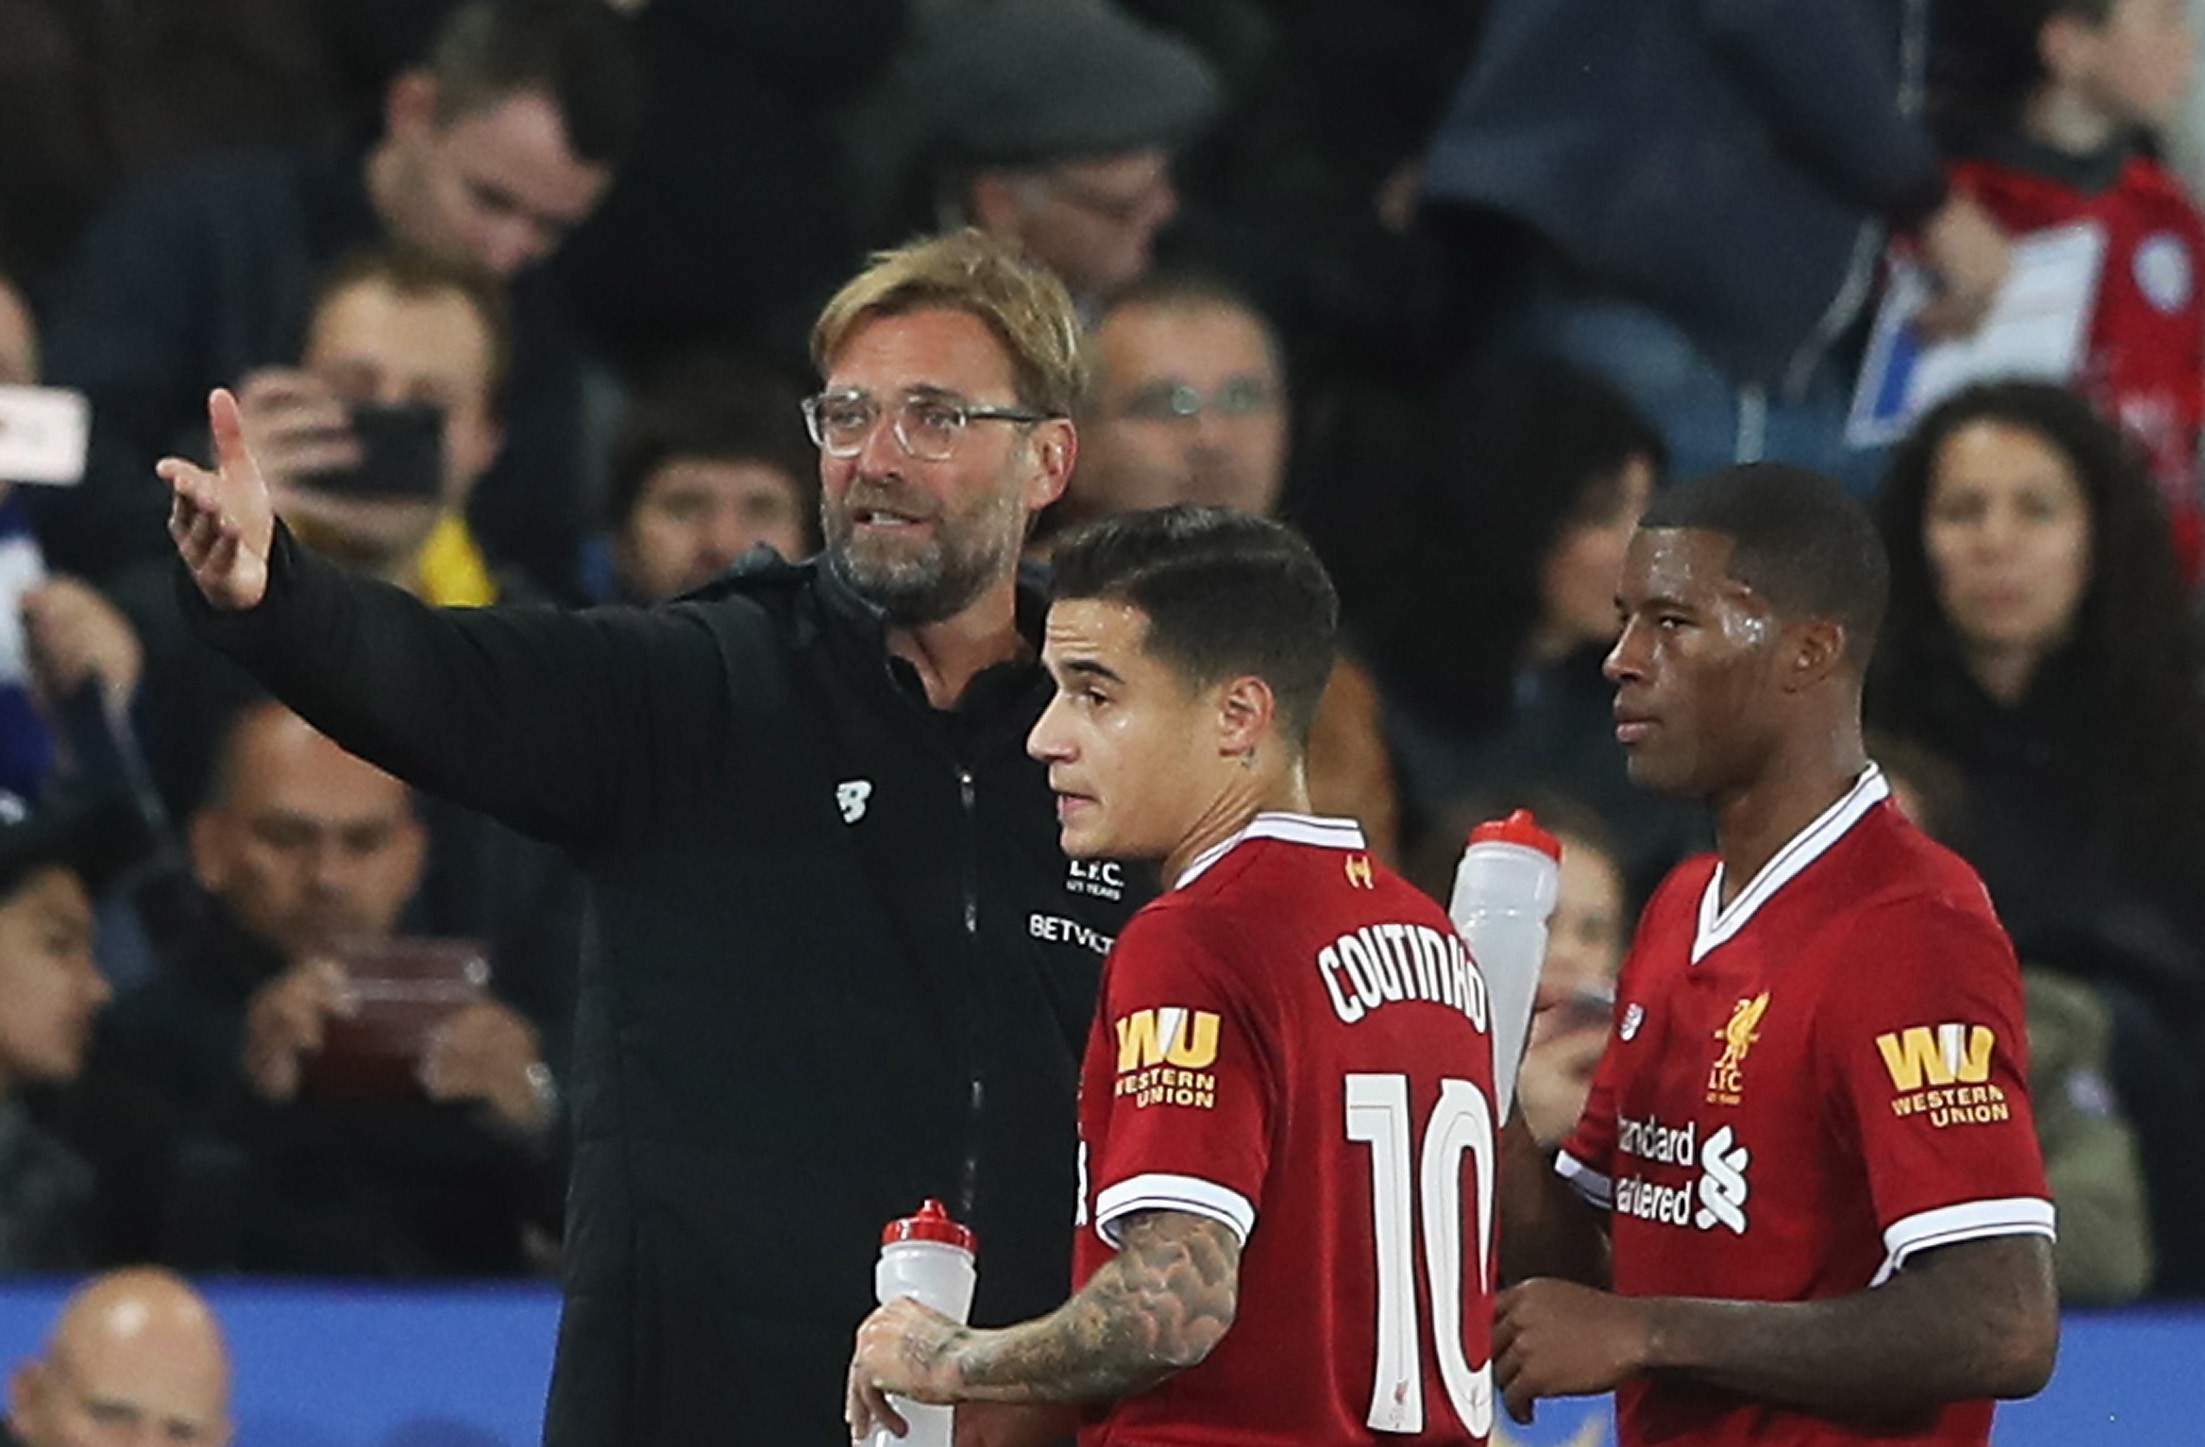 LEICESTER, ENGLAND - SEPTEMBER 19: Jurgen Klopp, Manager of Liverpool speaks with Philippe Coutinho of Liverpool and Georginio Wijnaldum of Liverpool during the Carabao Cup Third Round match between Leicester City and Liverpool at The King Power Stadium on September 19, 2017 in Leicester, England.  (Photo by Matthew Lewis/Getty Images)